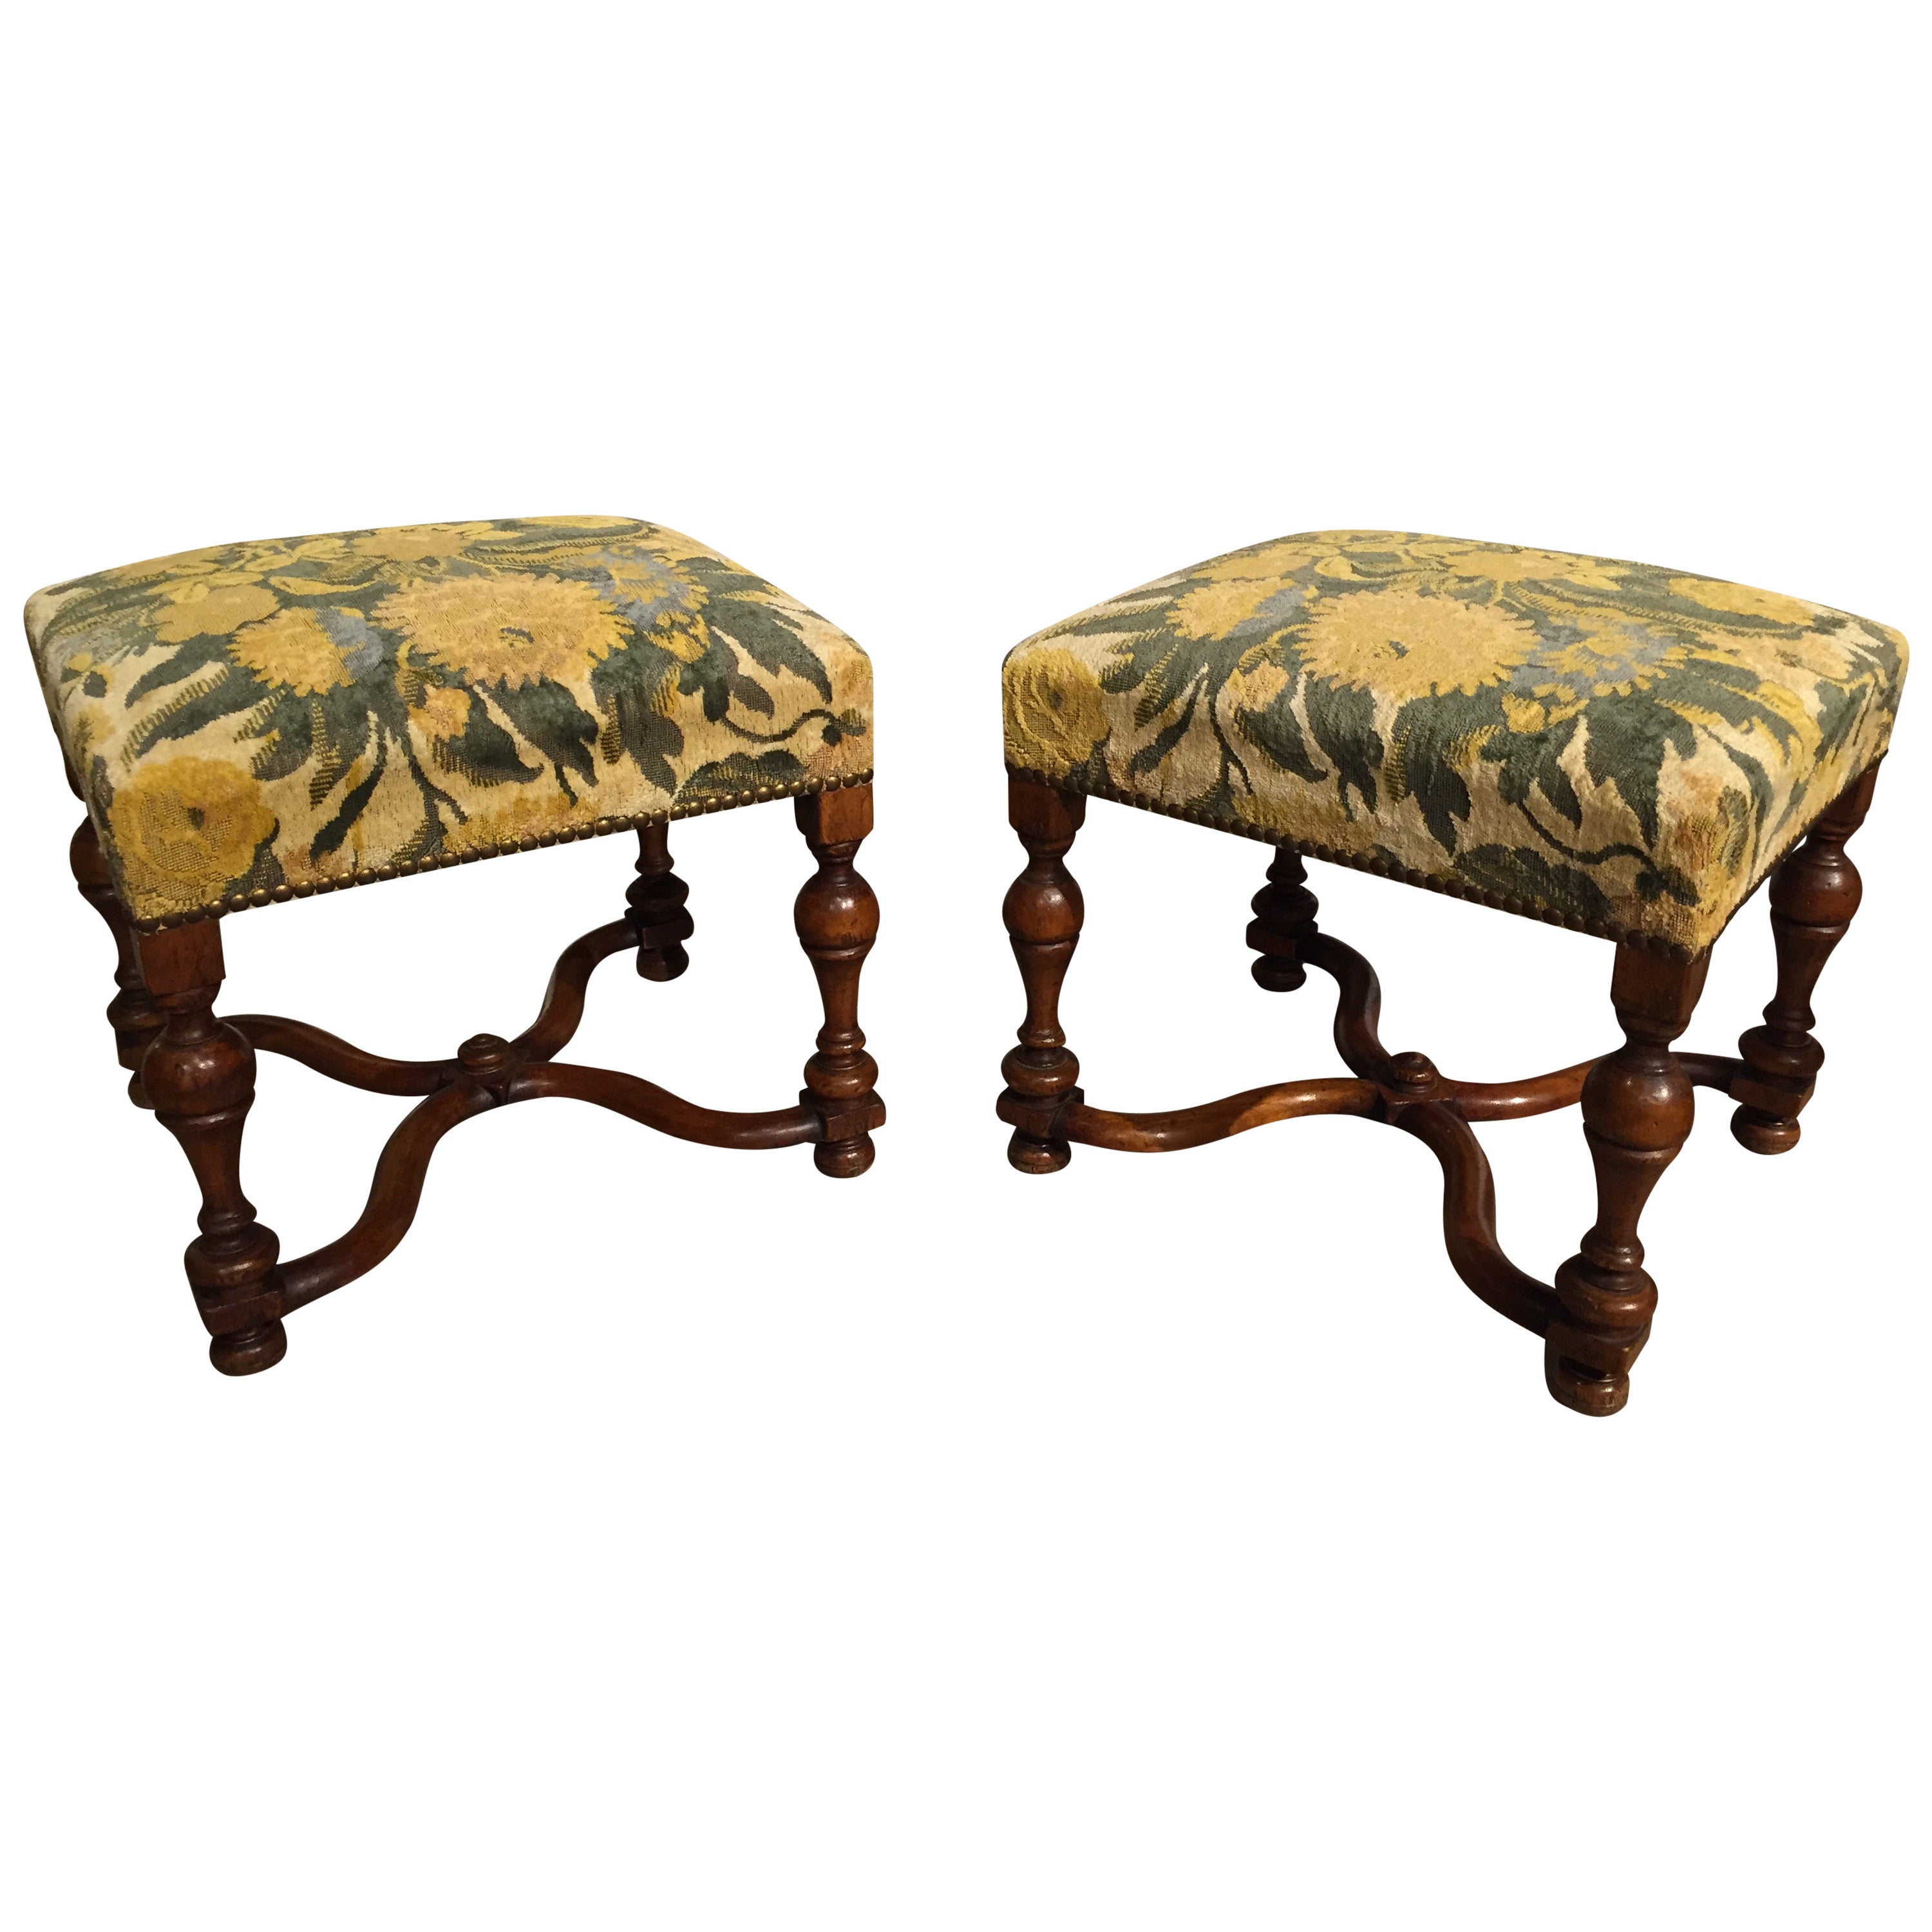 Pair of 19th Century Walnut Wood Tabourets from France